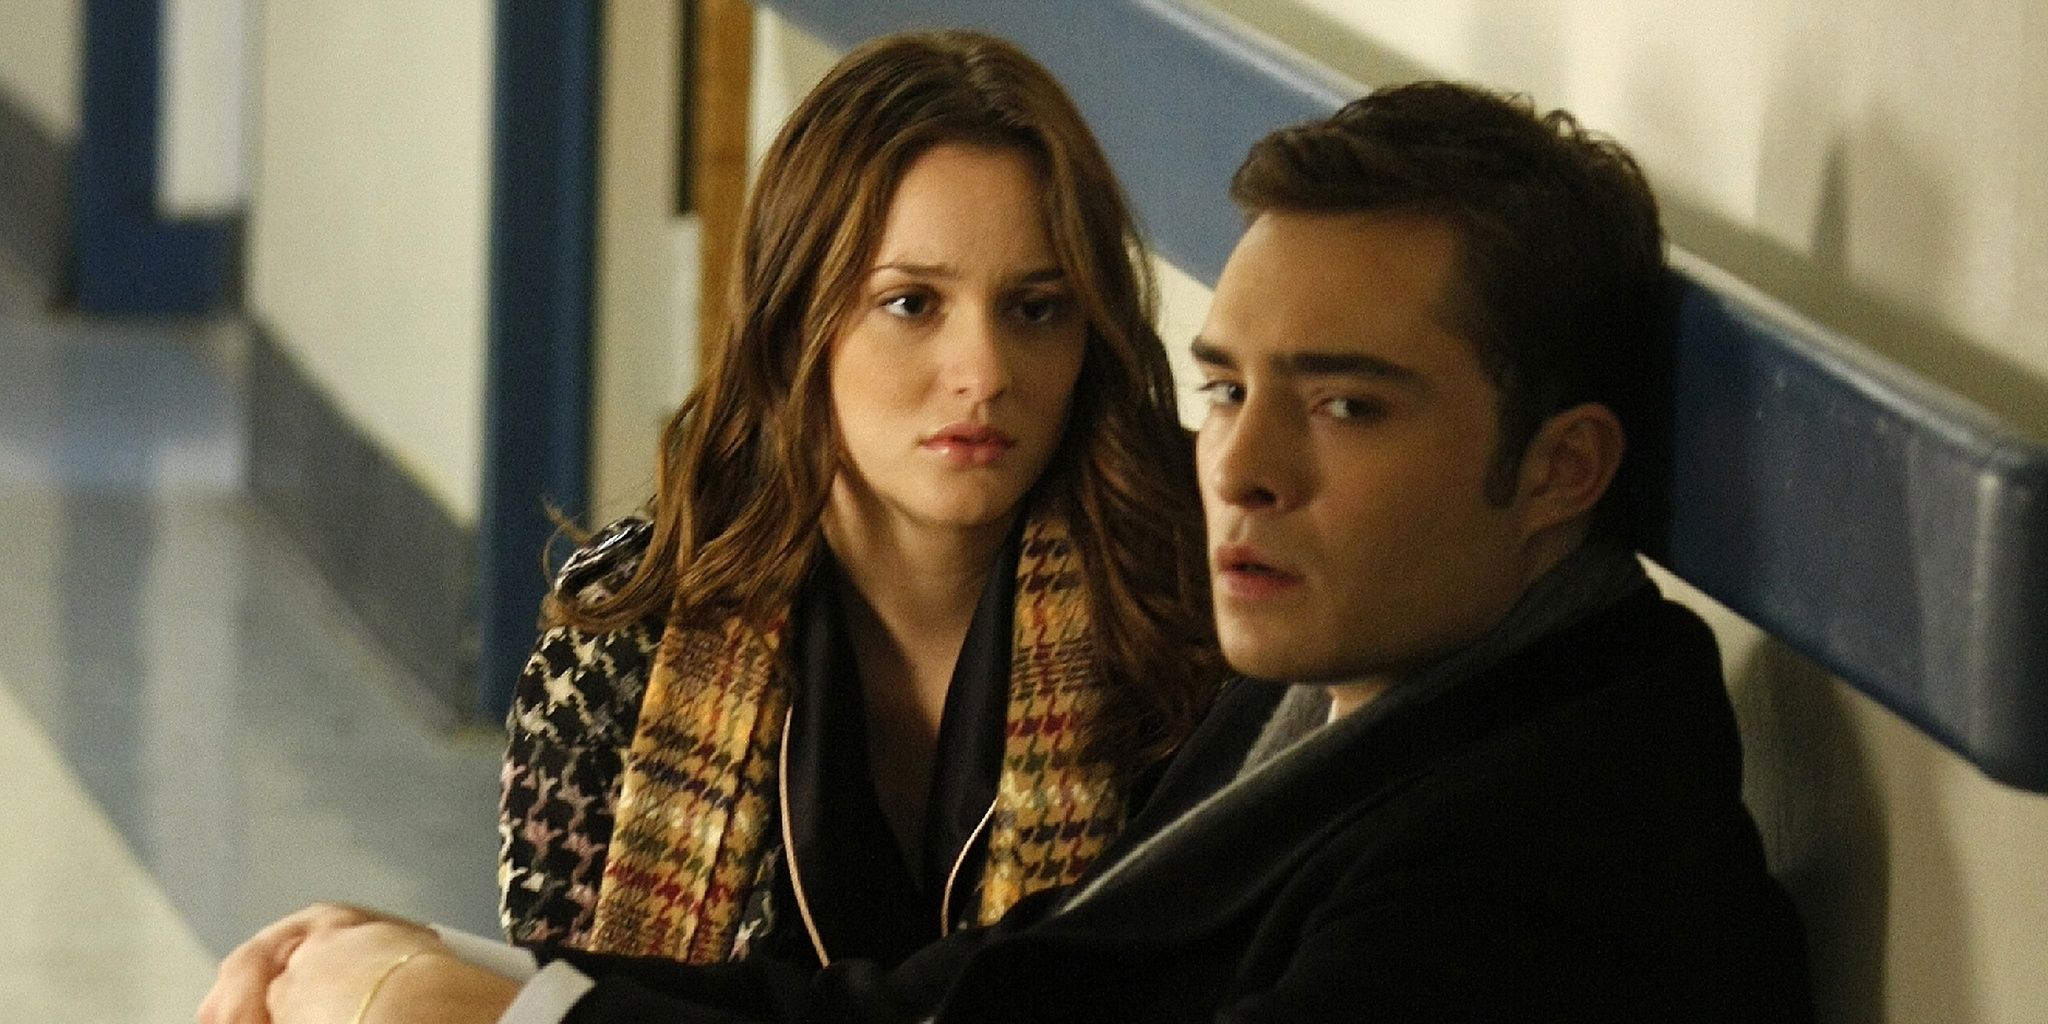 Chuck and Blair in hospital in Gossip Girl